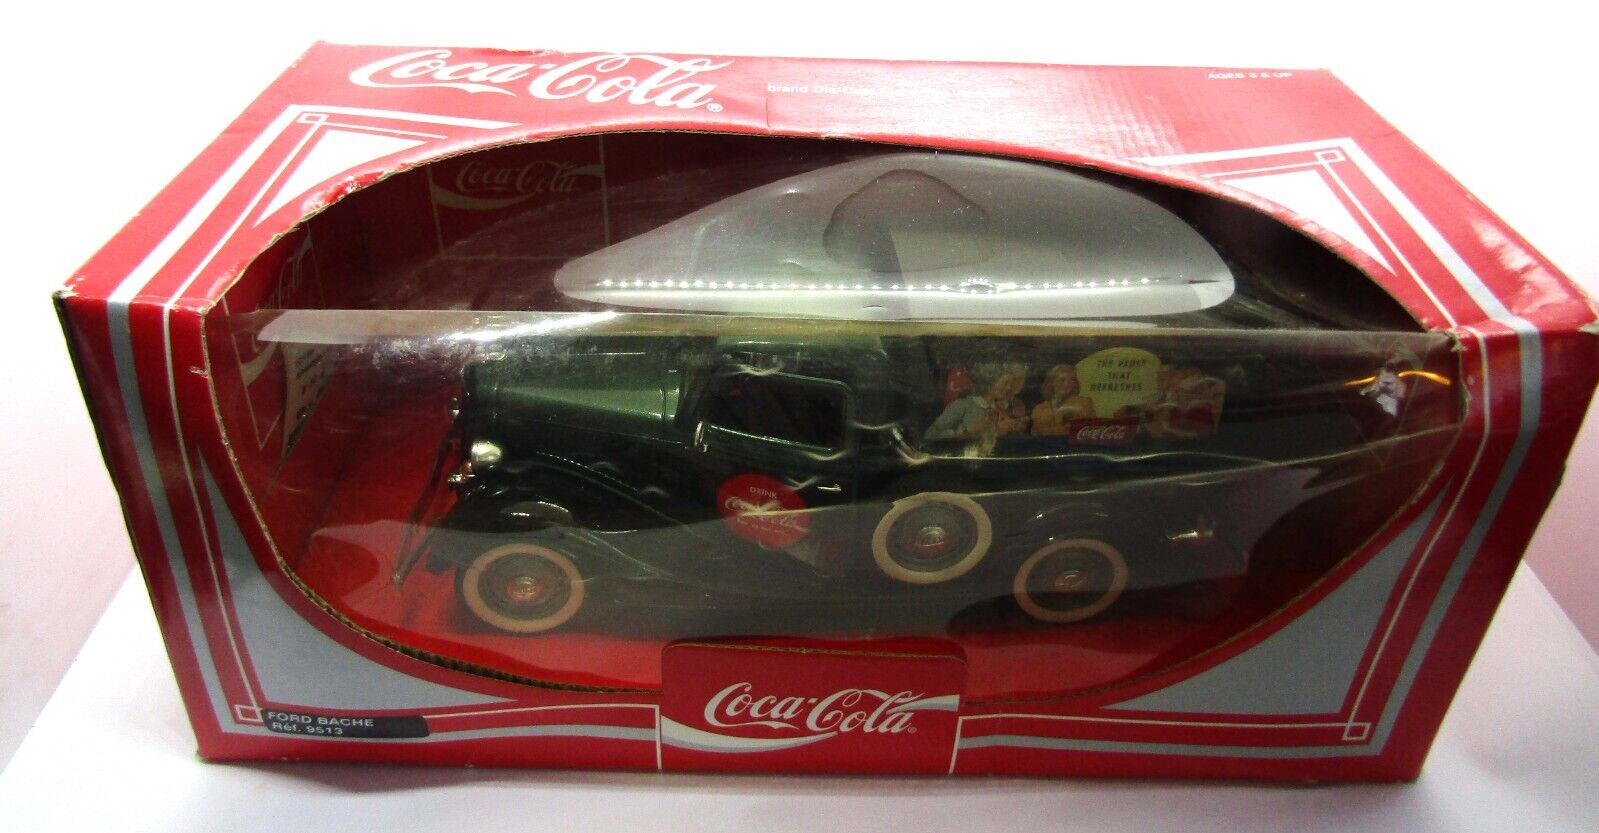 Vintage 1998 Coca Cola Brand Die-Cast Metal Green Ford Bache Delivery Truck. Ne